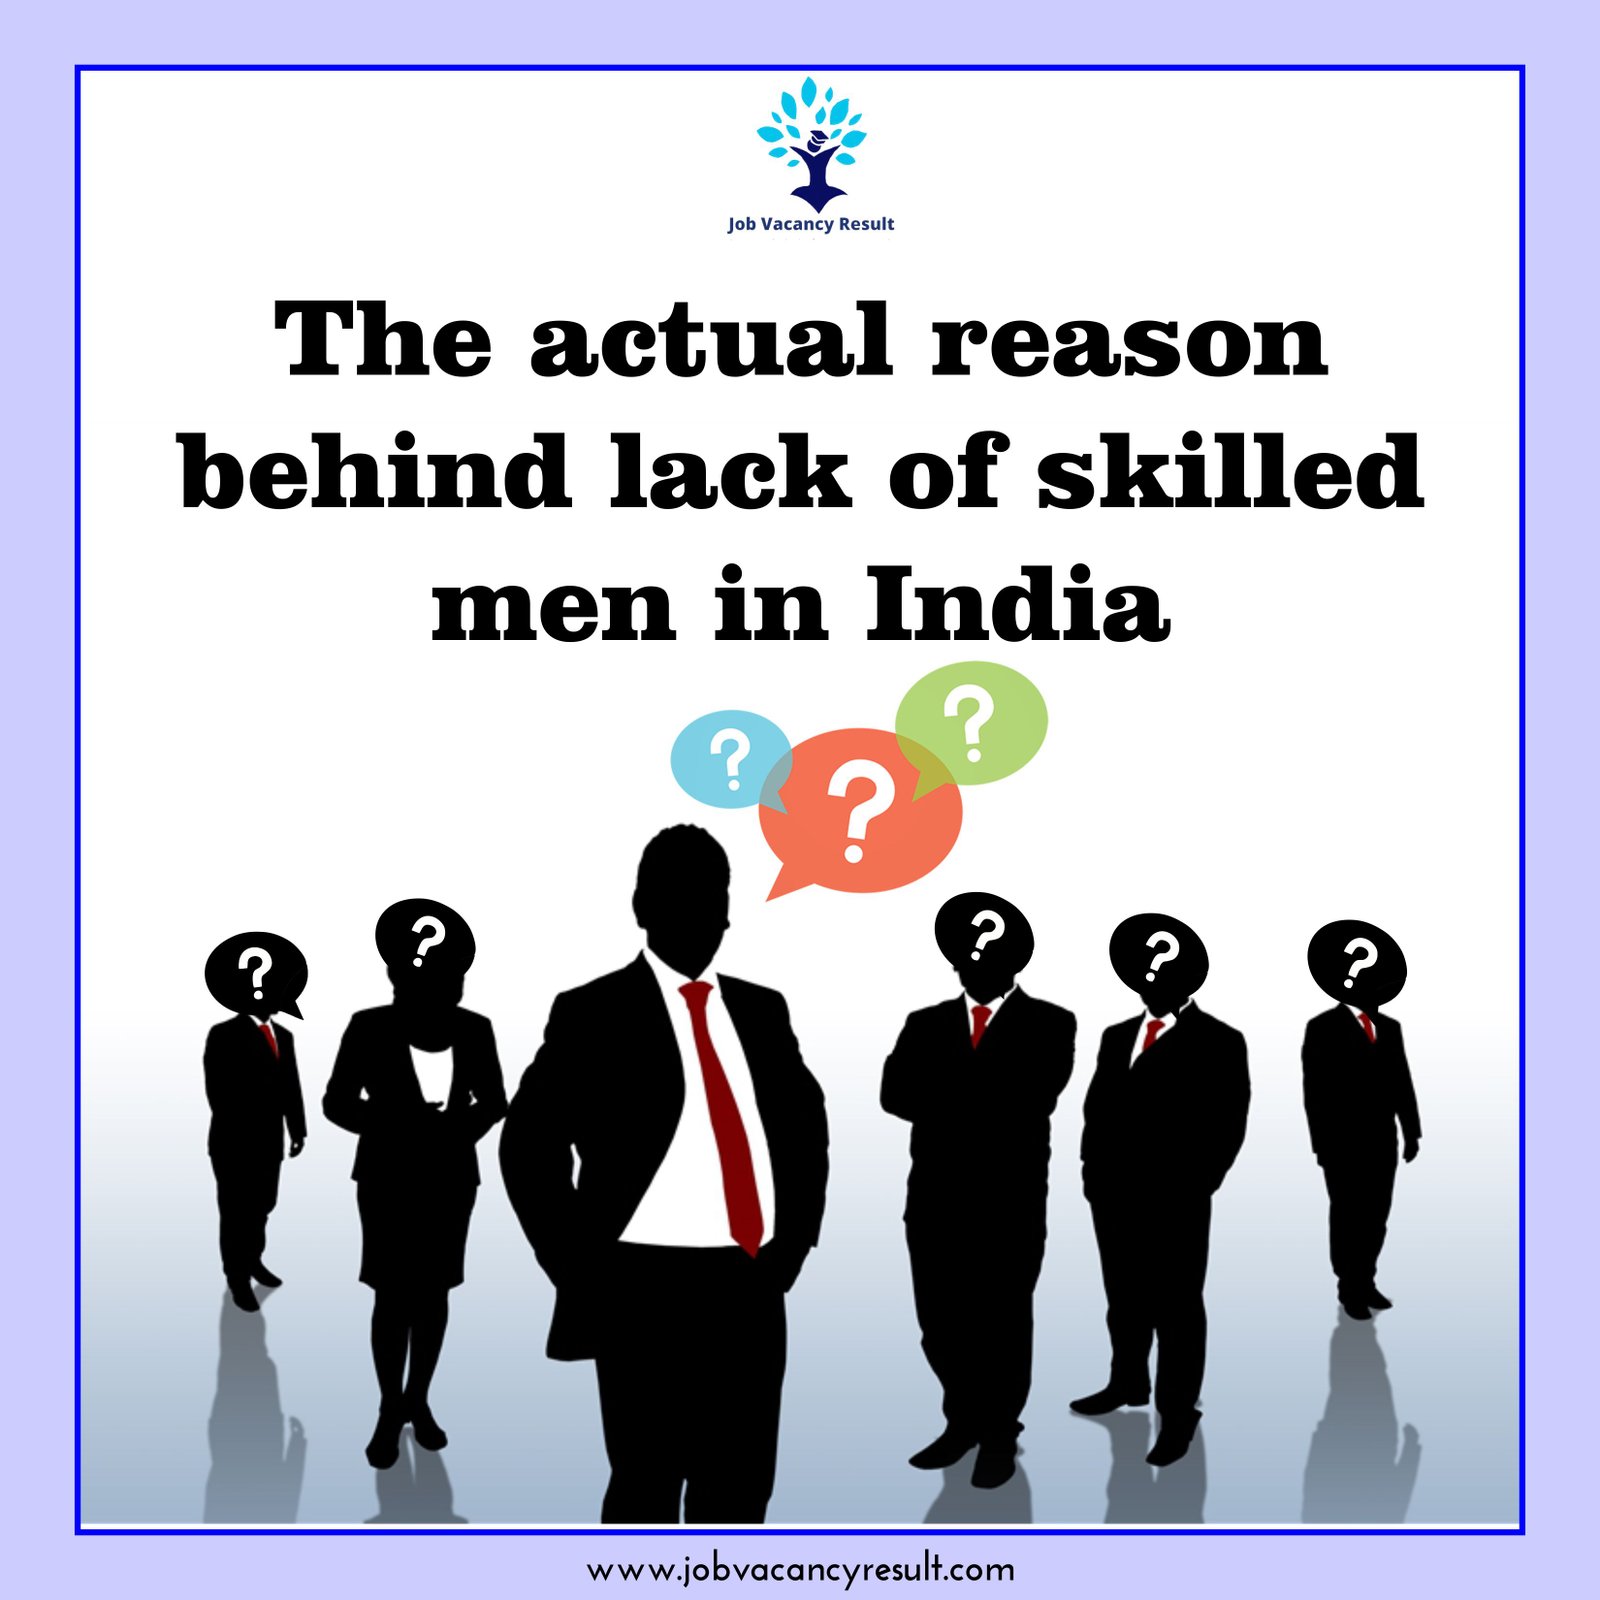 The actual reason behind lack of skilled men in India